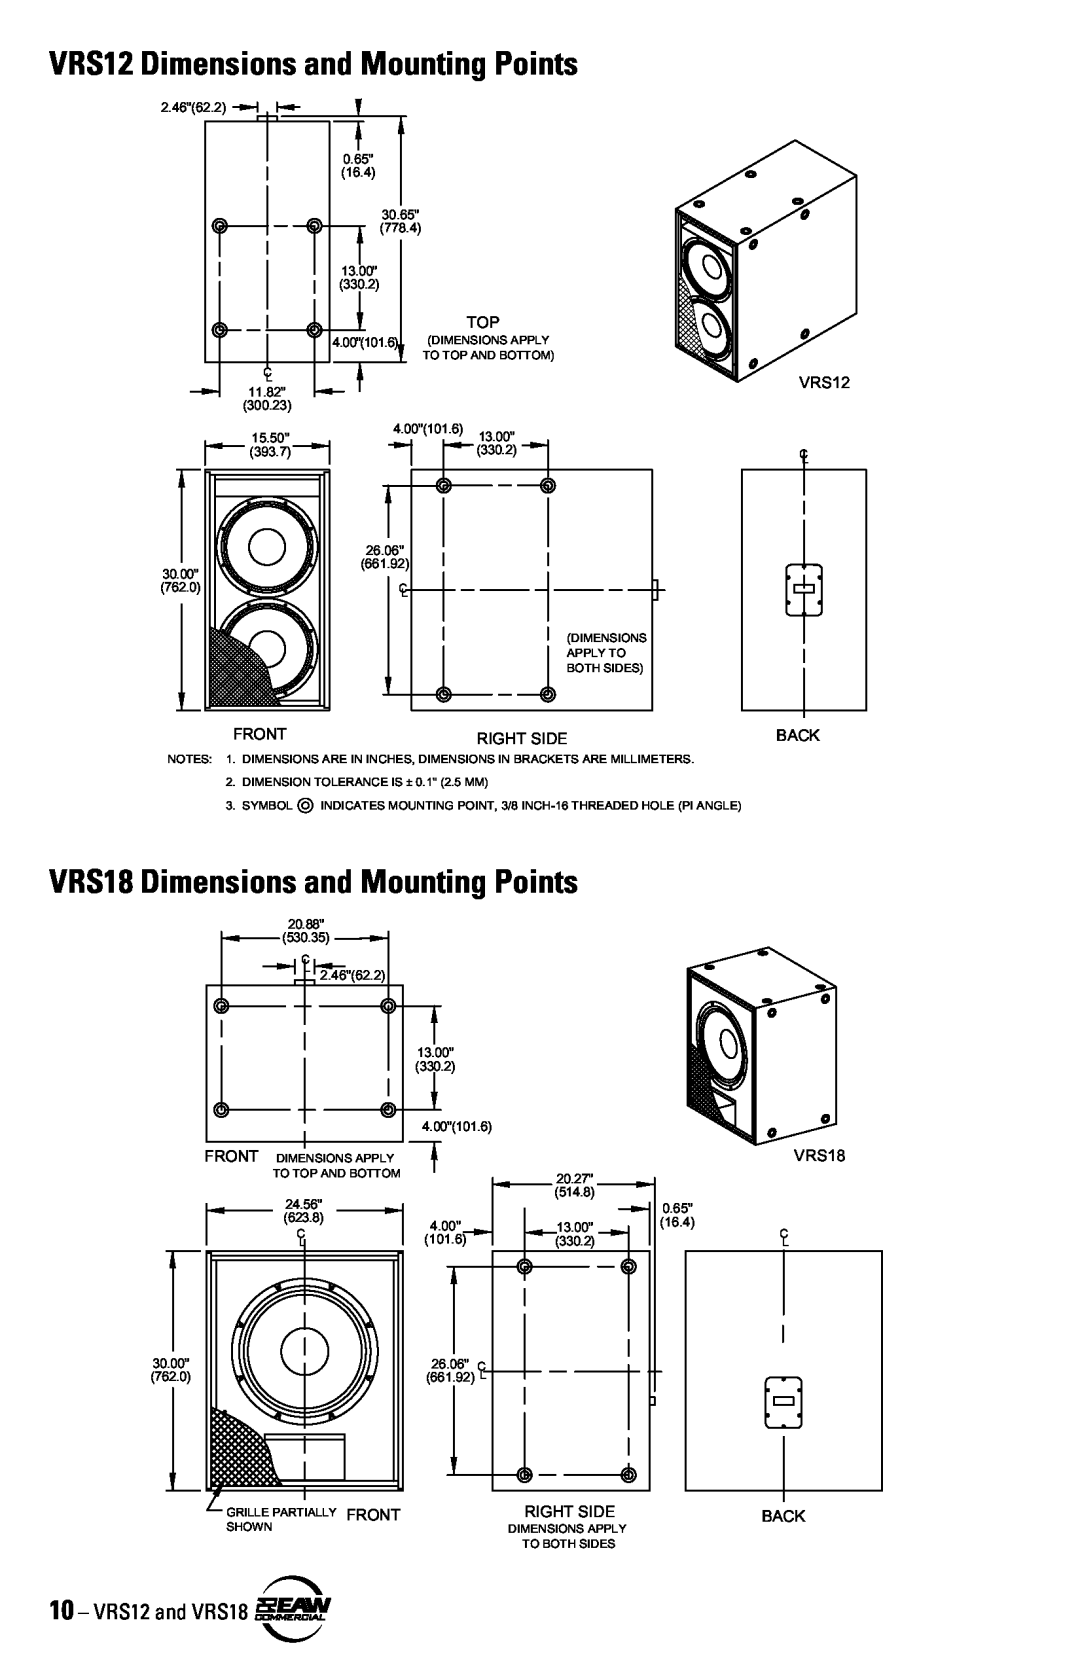 EAW VRS12 VRS18 VRS12 Dimensions and Mounting Points, VRS18 Dimensions and Mounting Points, Front, Right Side, Back 